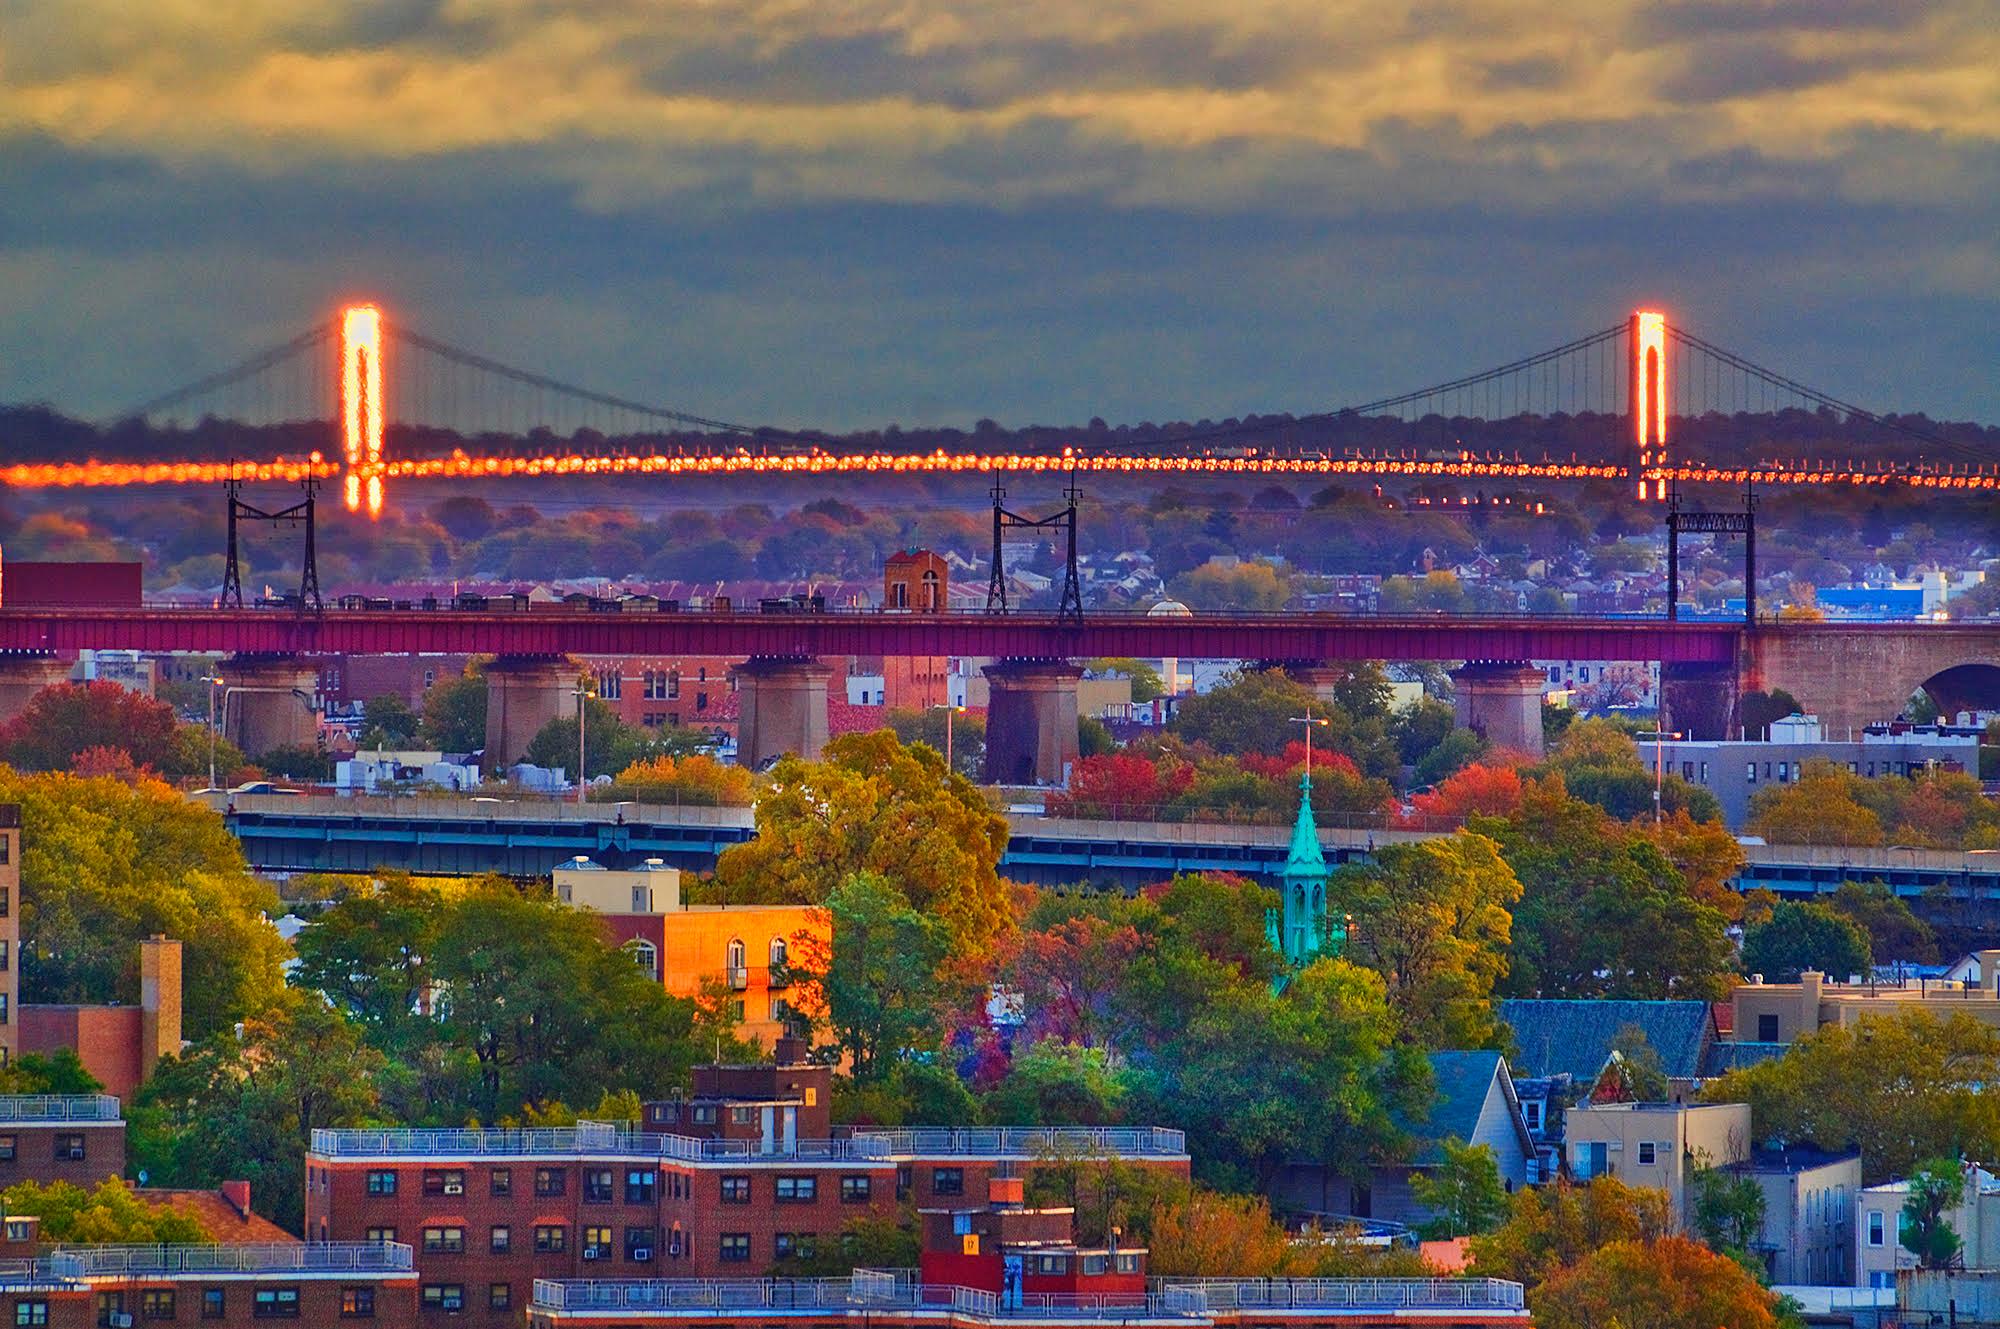 Mitchell Funk Color Photograph - Magical New York in Autumn Colors with Golden Light on Glowing Bridge